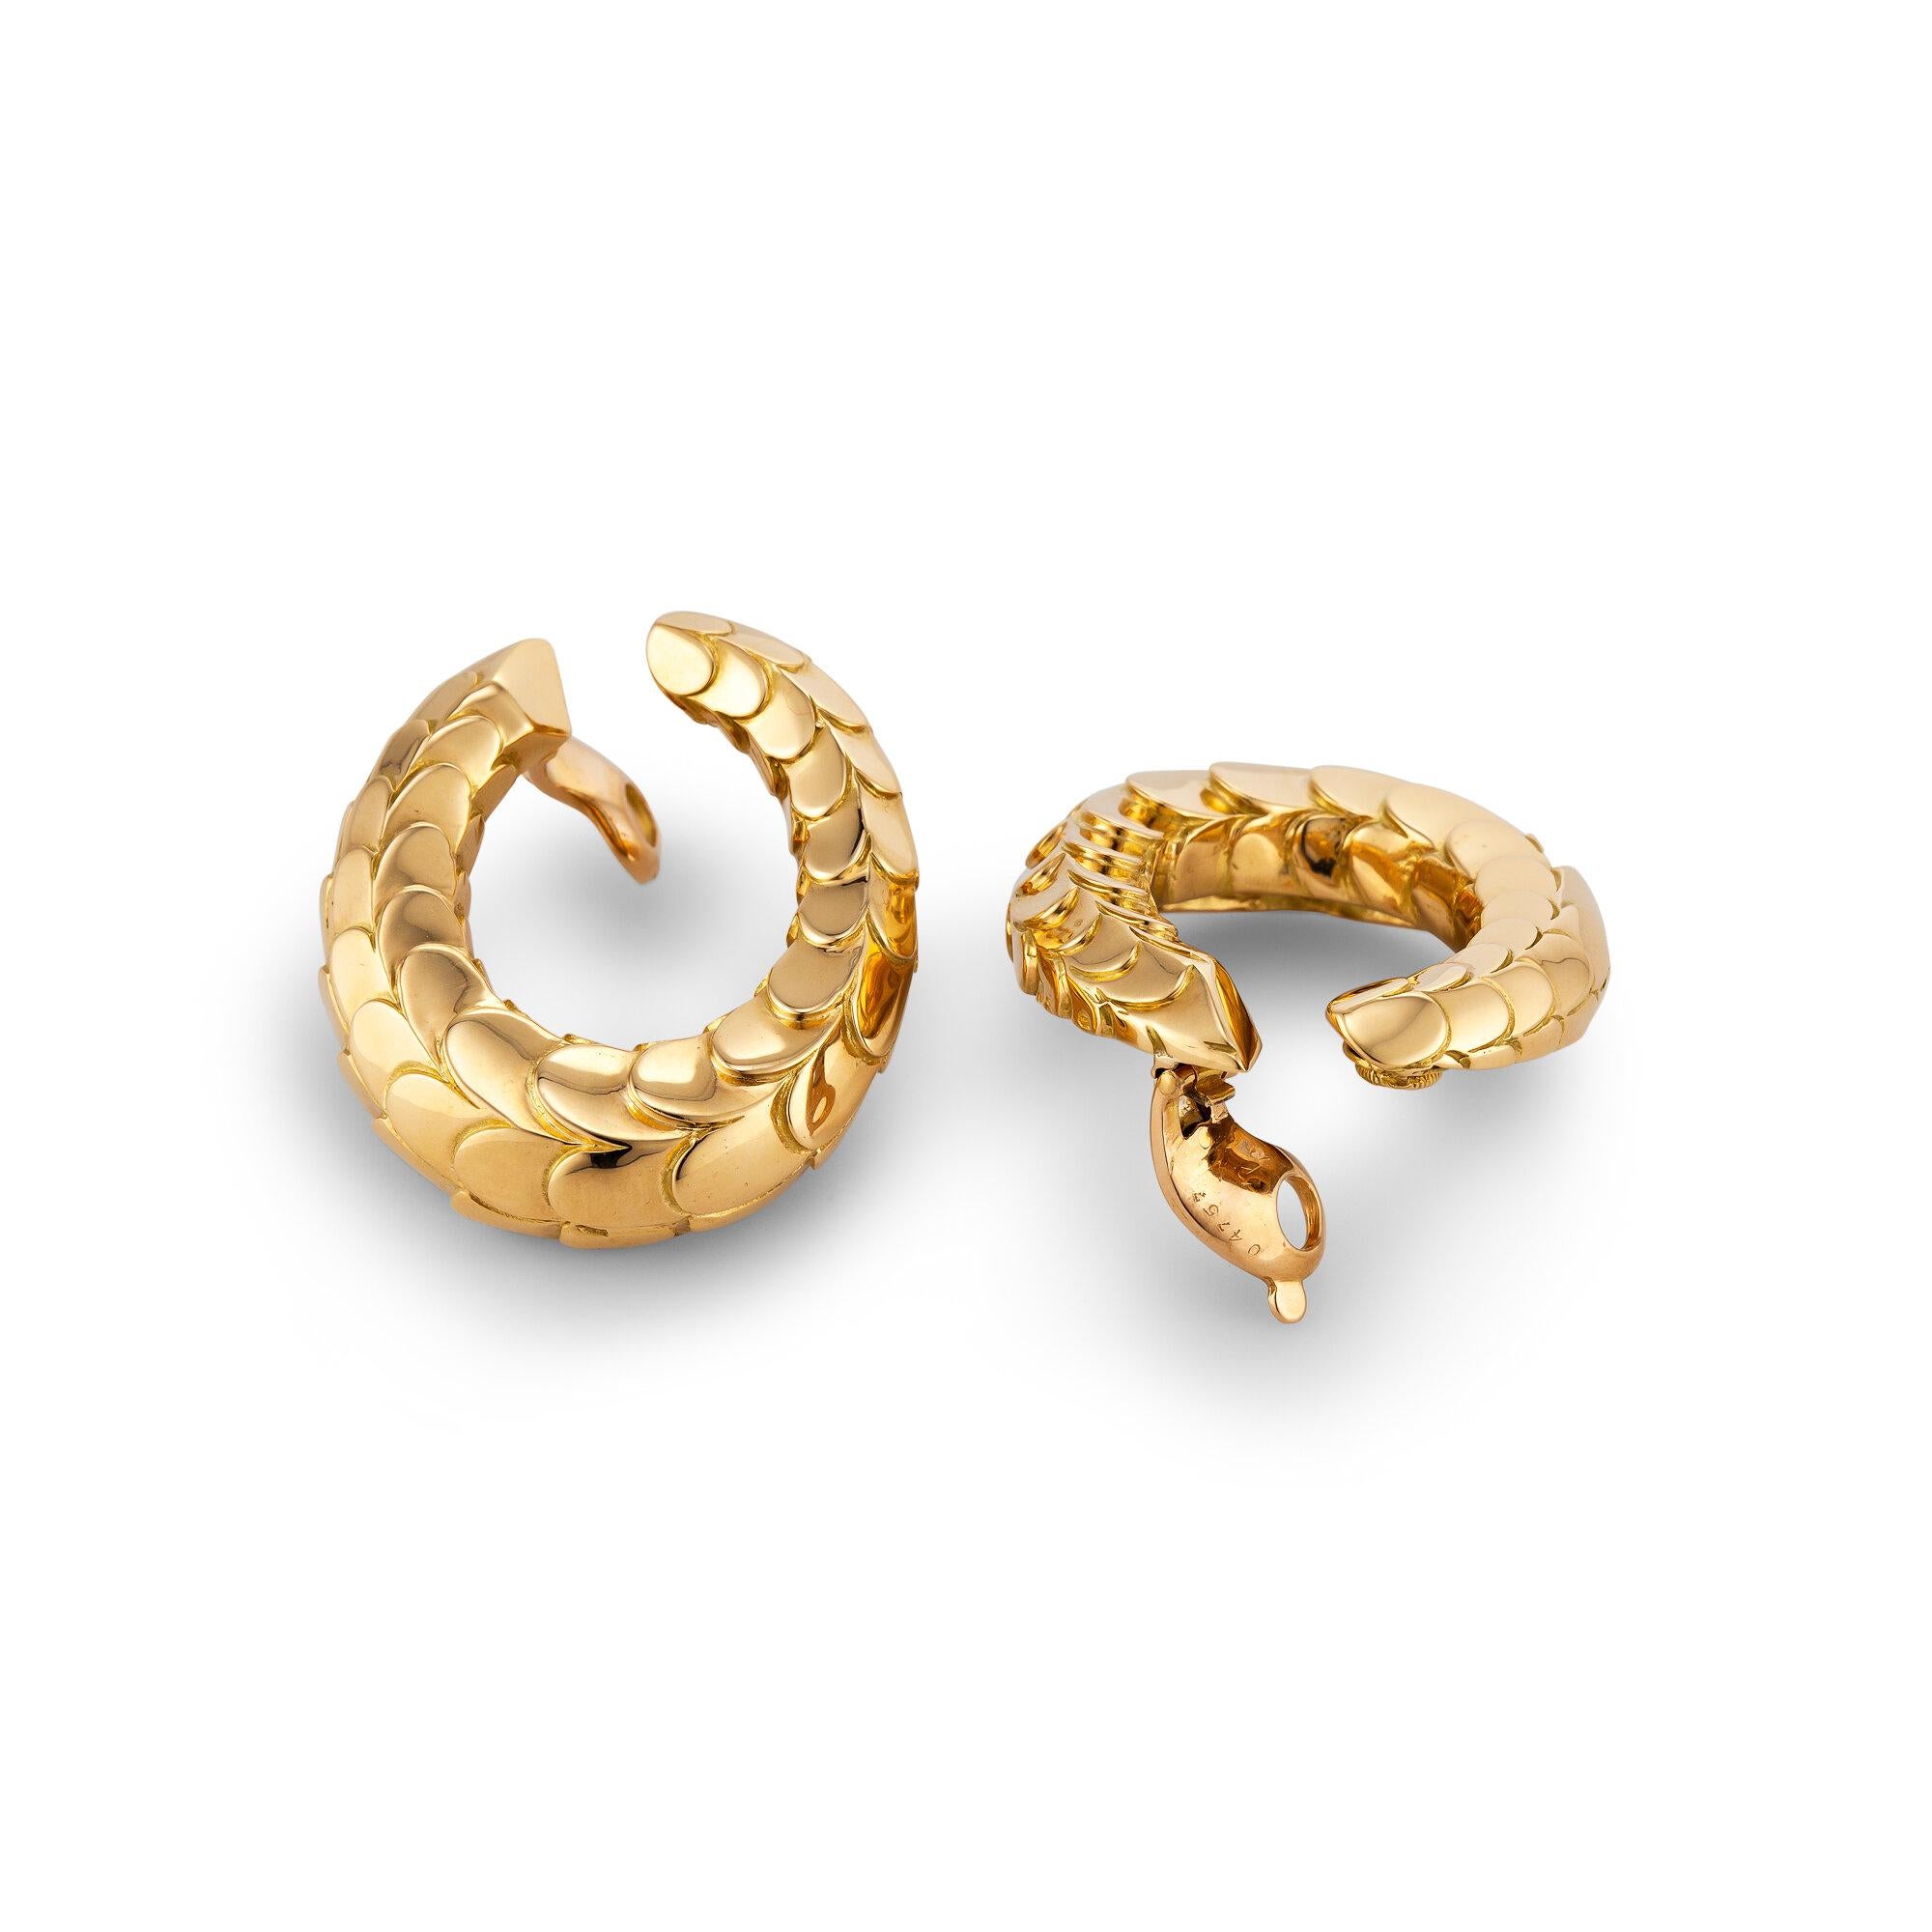 The perfect gold clip hoop earrings have finally been found!  With a chic scale surface pattern, these bespoke earrings were designed in the 1970' by George L'Enfant for Cartier Paris and will easily take you from day to night.  18 karat yellow